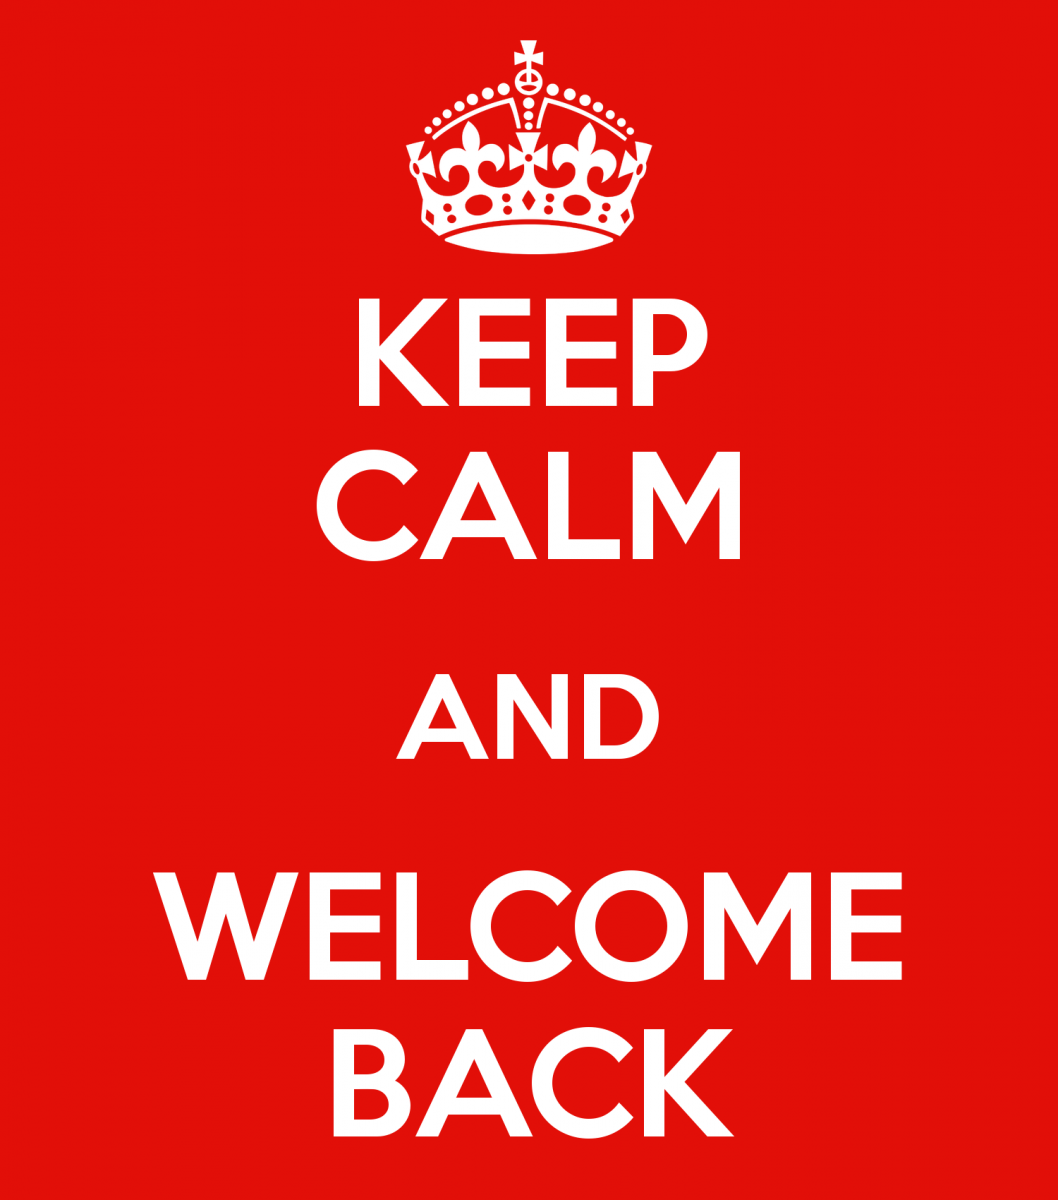 Keep calm and welcome back